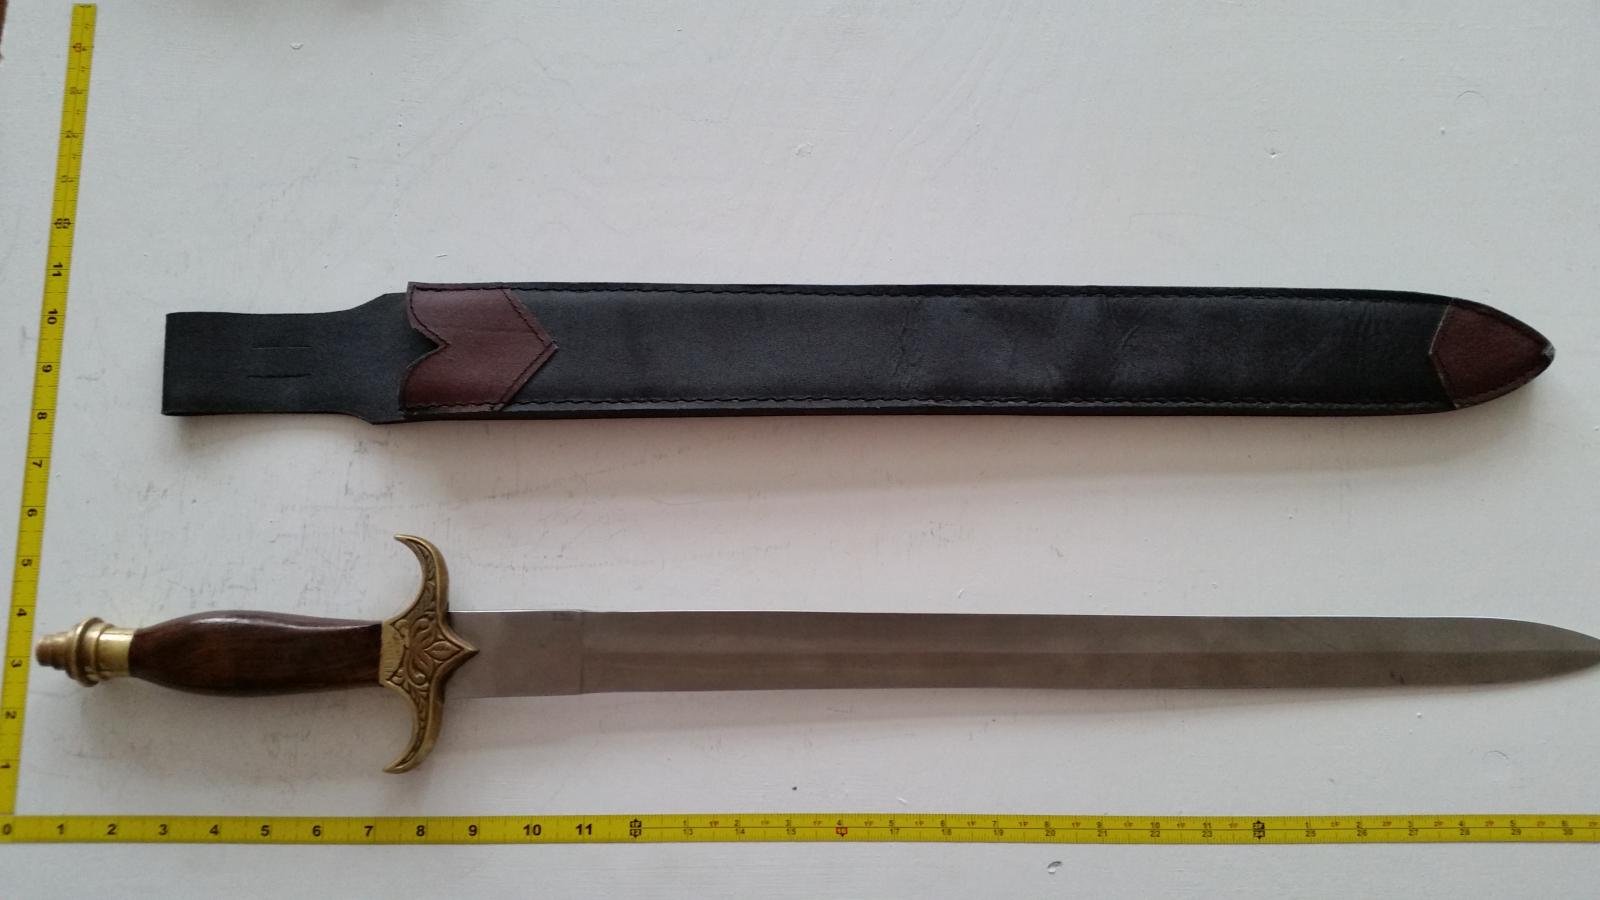 Heavy Weight Steel, With Sheath - NOT approved for blade-to-blade stage combat.